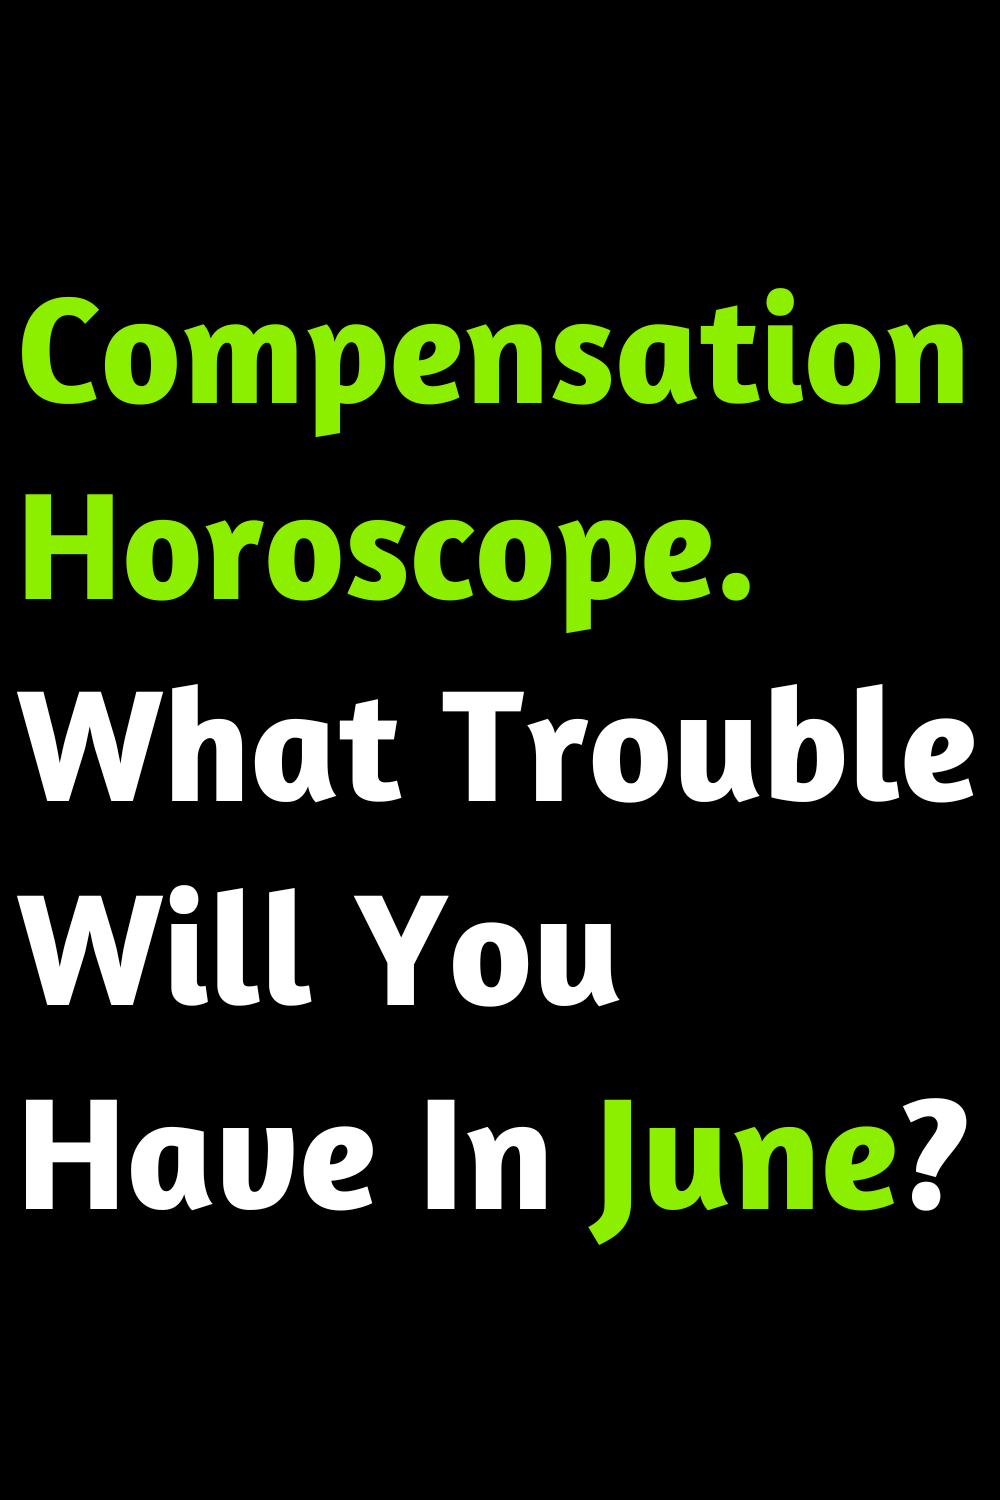 Compensation Horoscope. What Trouble Will You Have In June?